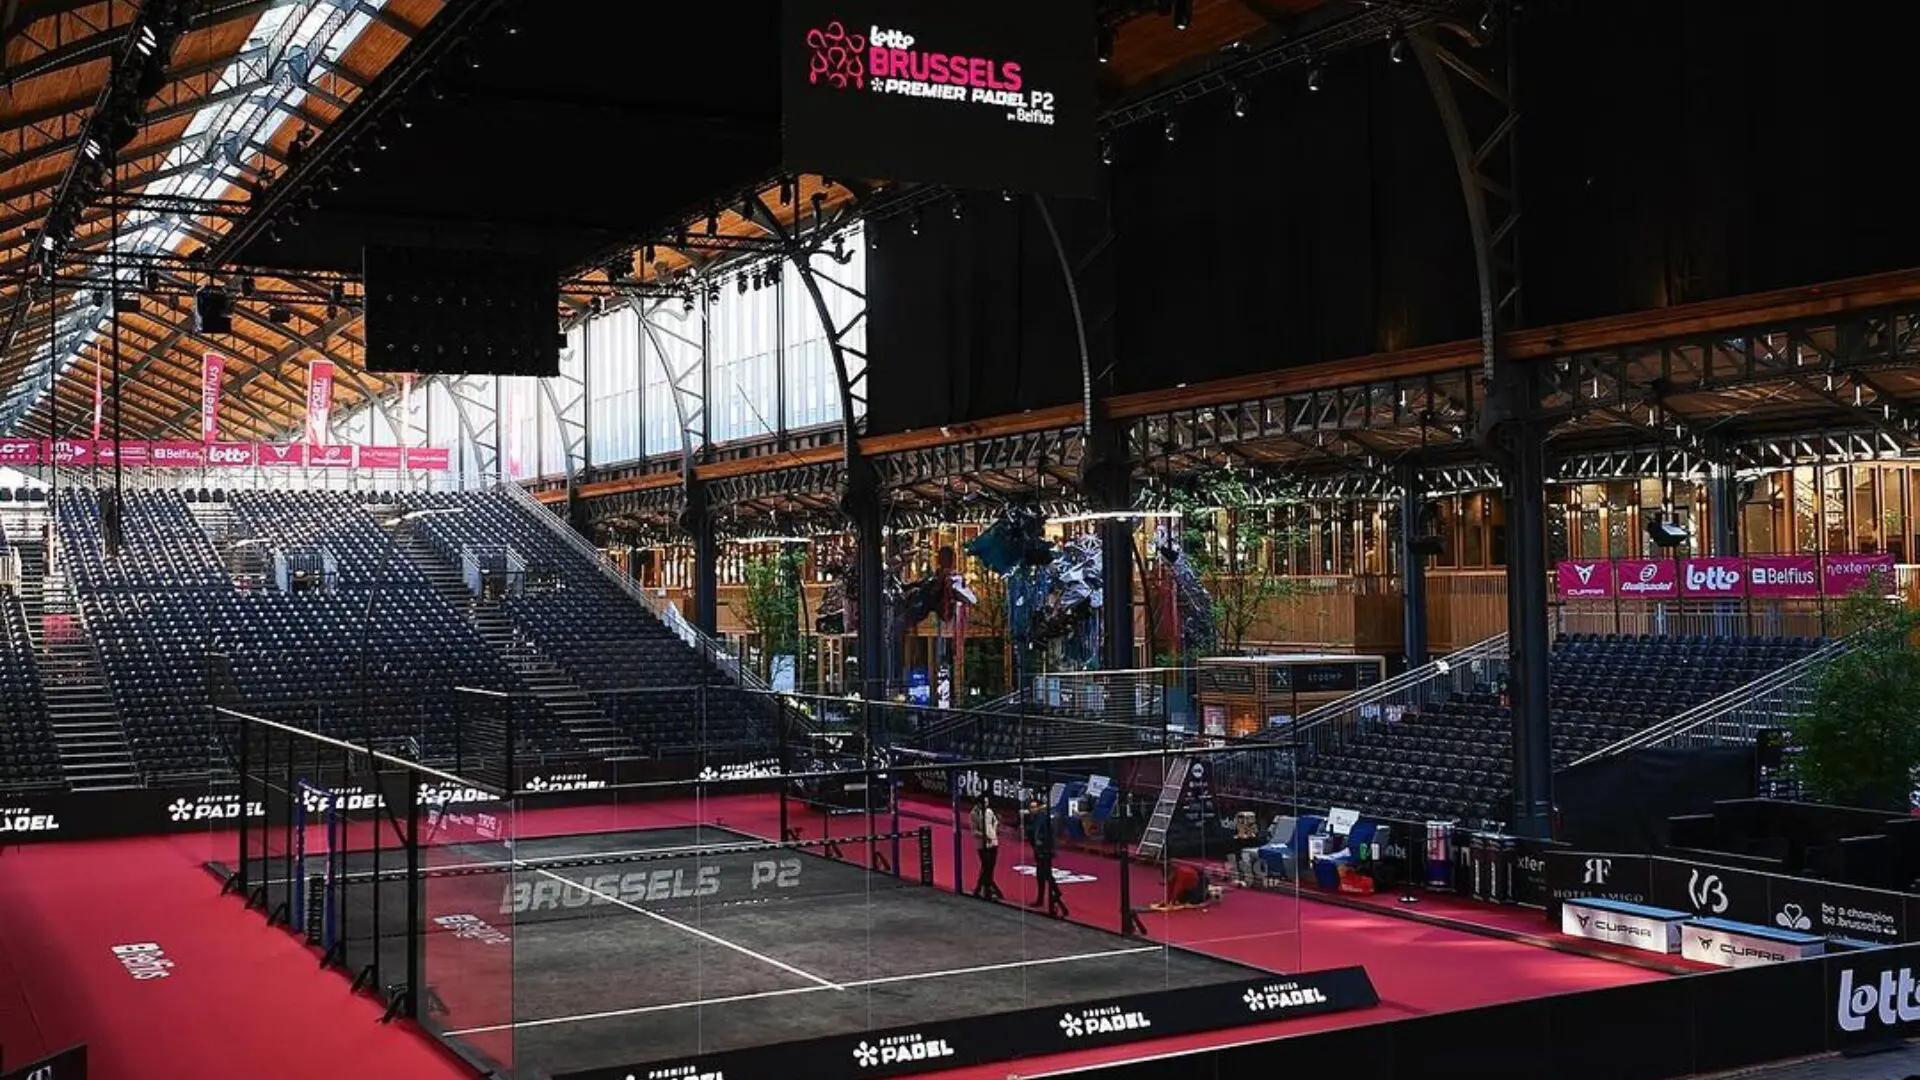 Premier Padel Brussels P2 – Already shocks this Wednesday, and a Frenchwoman making her debut in Belgium